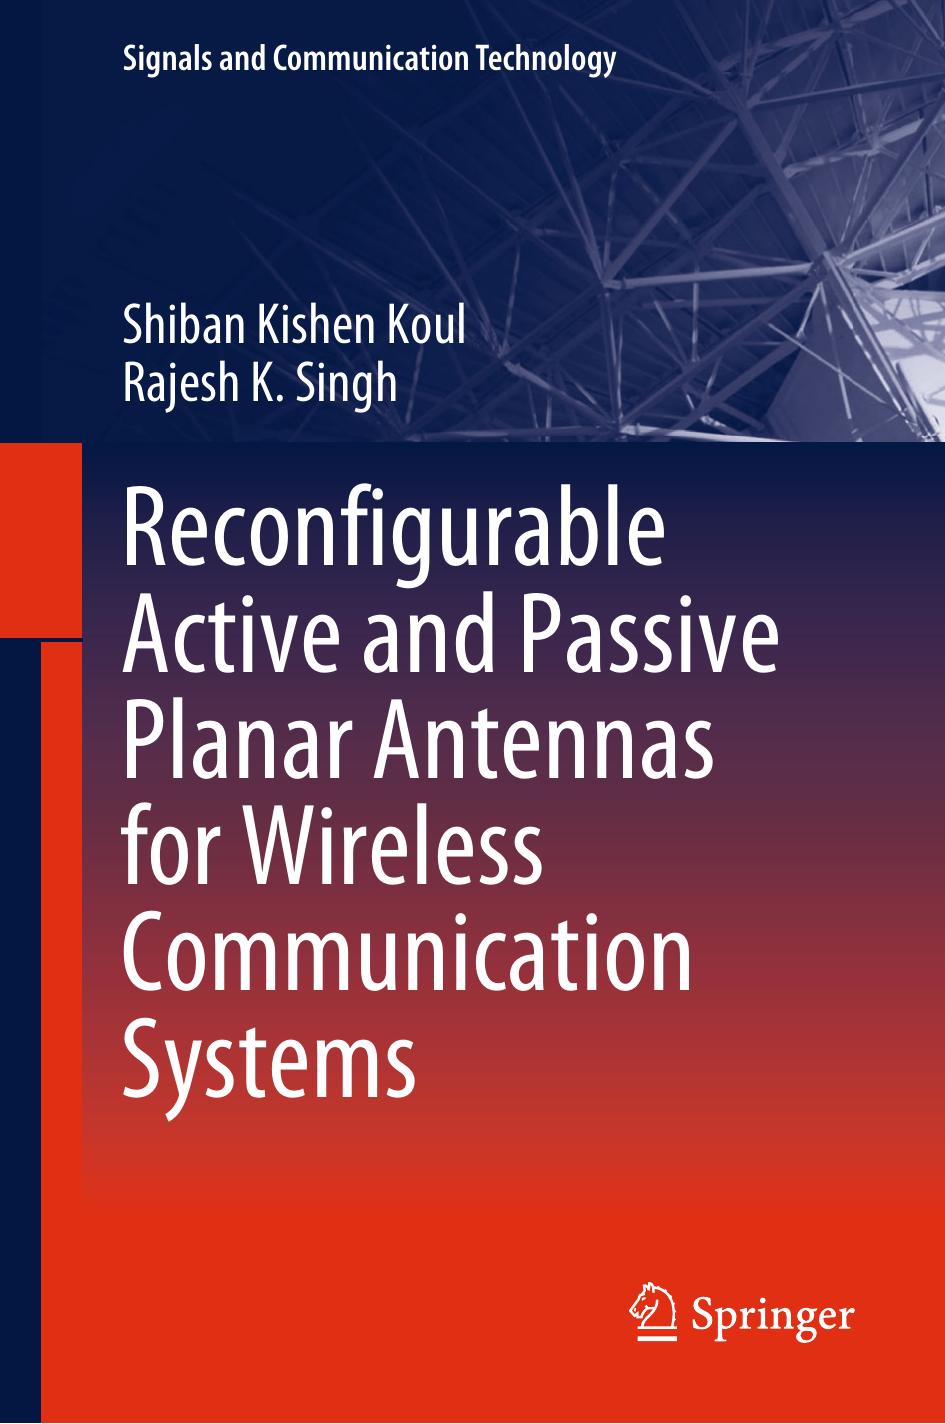 Reconfigurable Active and Passive Planar Antennas for Wireless Communication Systems (Signals and Communication Technology) by Shiban Kishen Koul Rajesh K. Singh